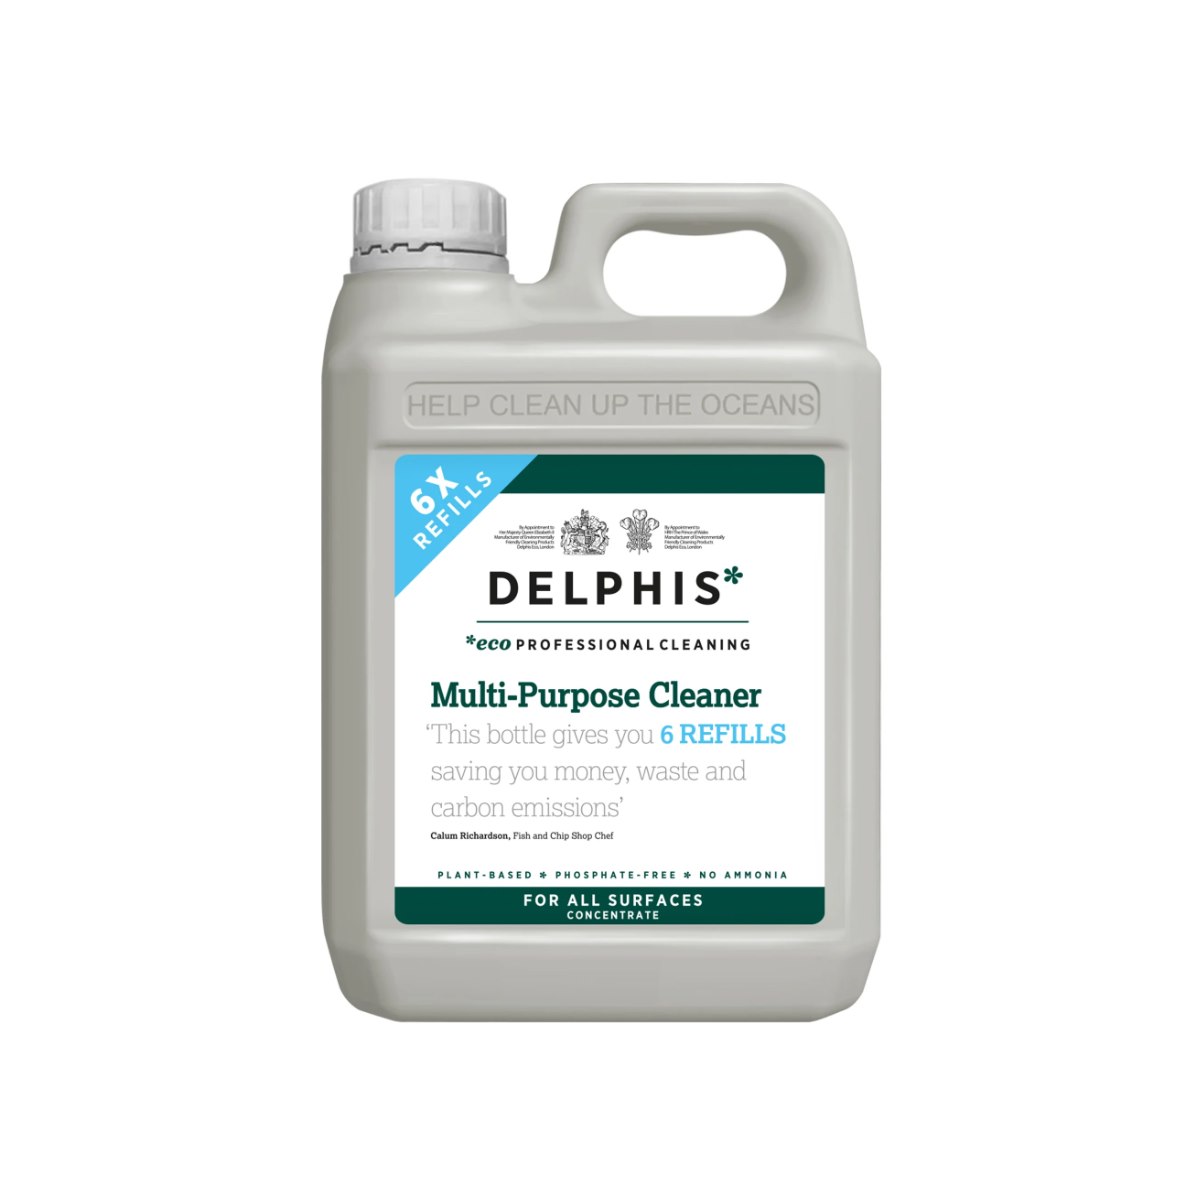 Delphis Eco Professional Cleaning Multi-Purpose Cleaner Refill 2 Litre